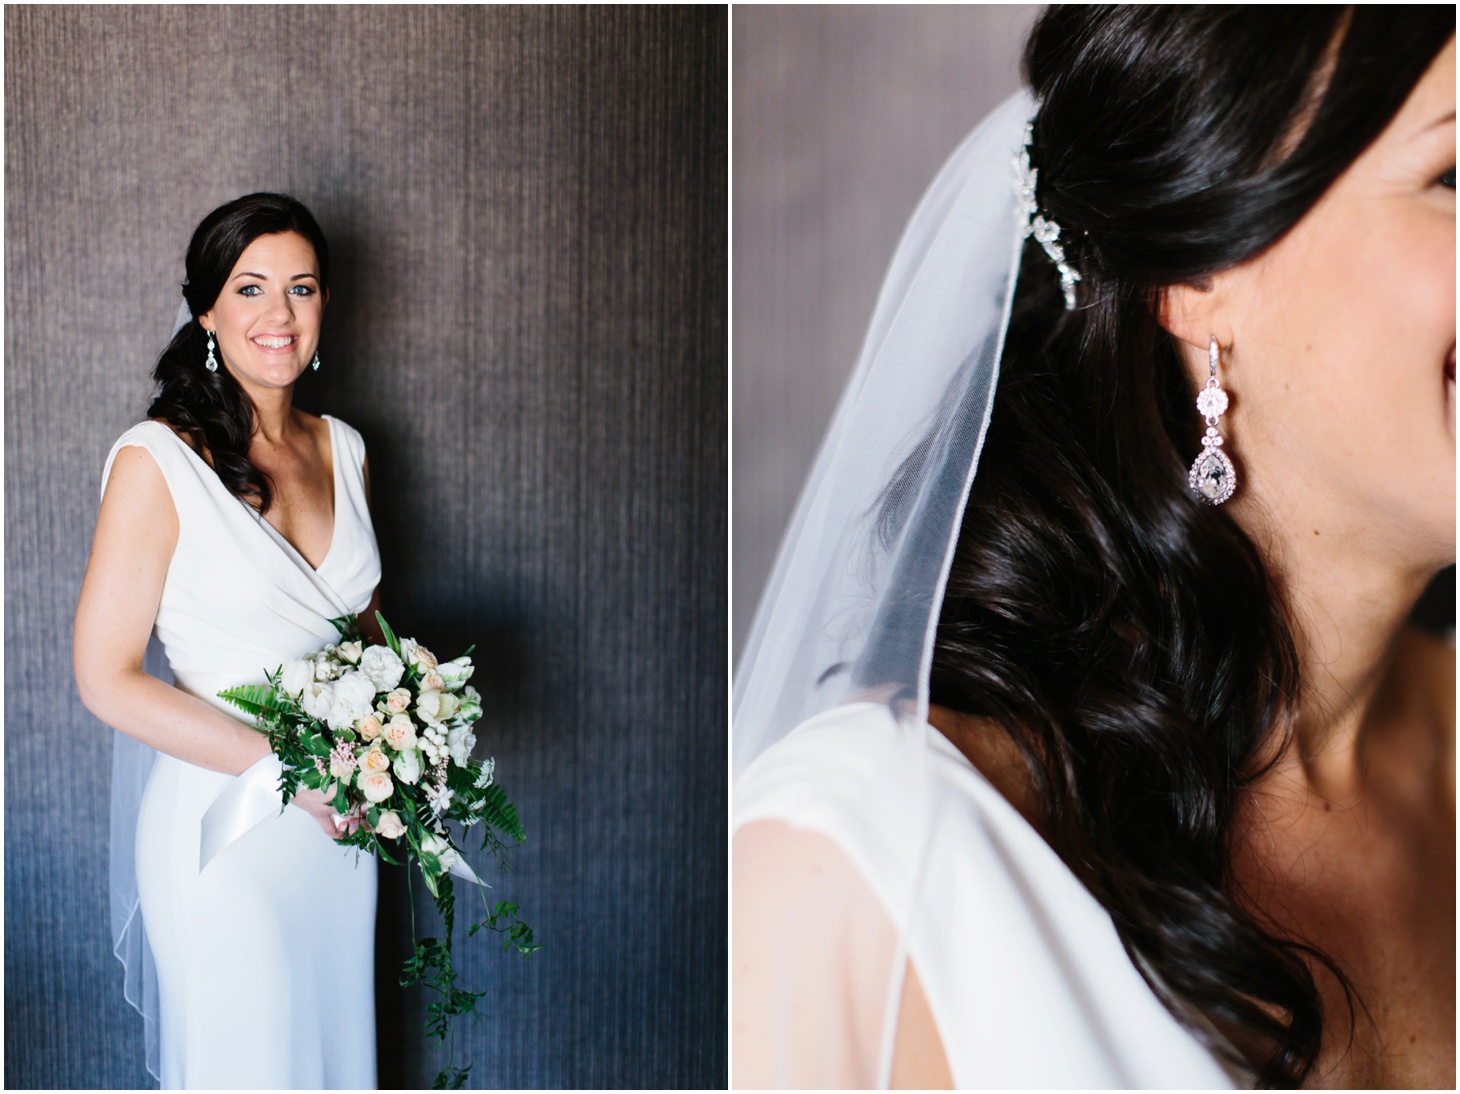 Mikey & Megan, Downtown DC Wedding at National Museum of Women in the Arts by Sarah Bradshaw Photography_0017.jpg